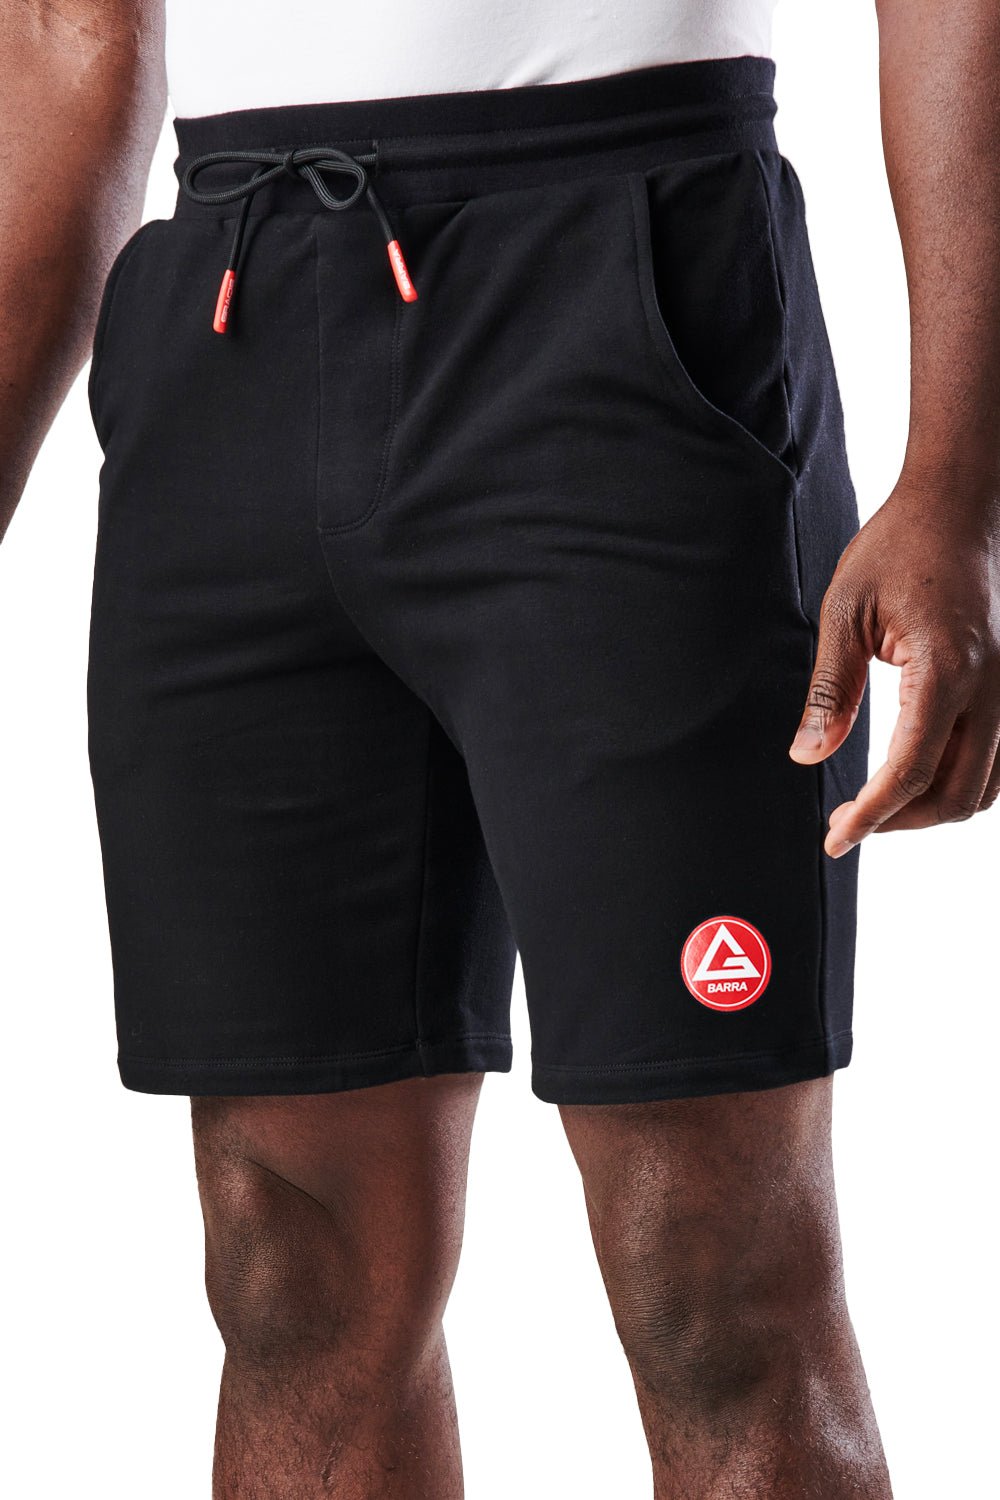 Red Shield Classic Lounge Short - Black